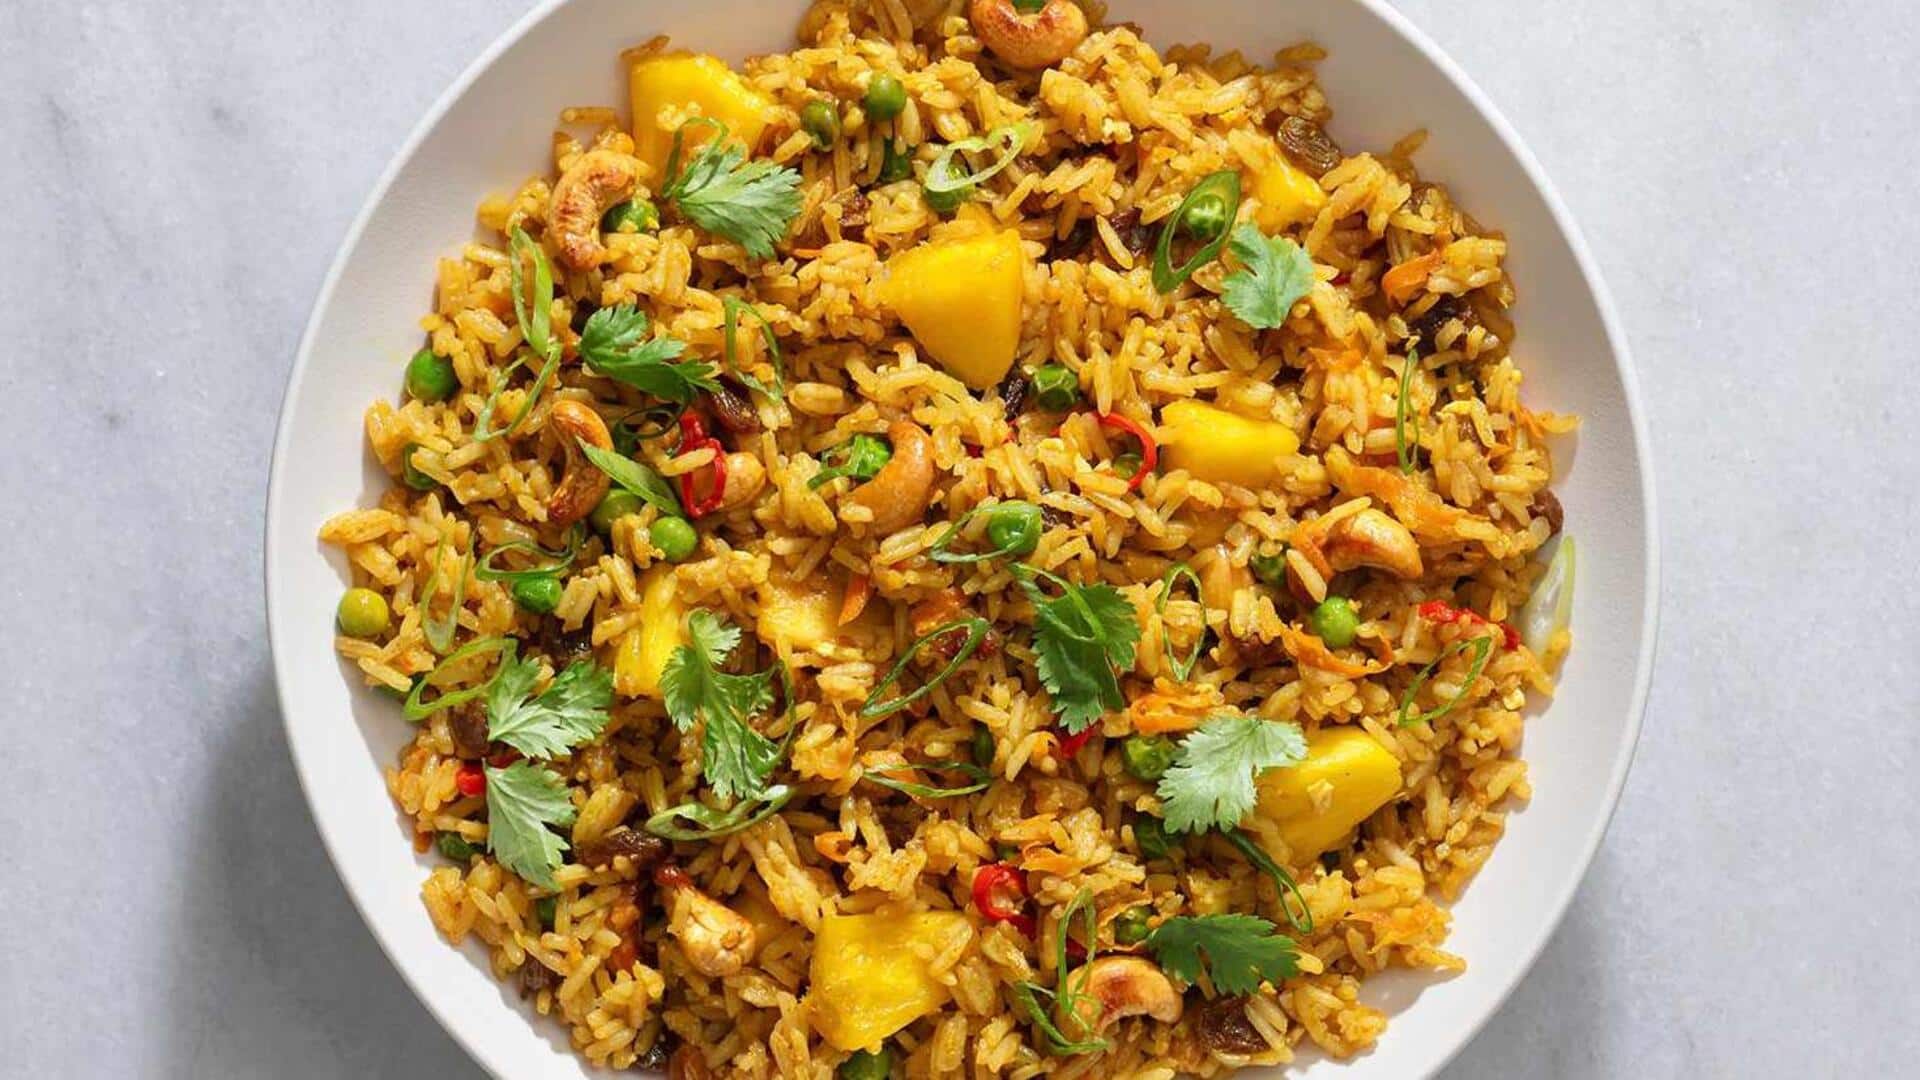 Impress your guests with this heavenly Hawaiian pineapple fried rice